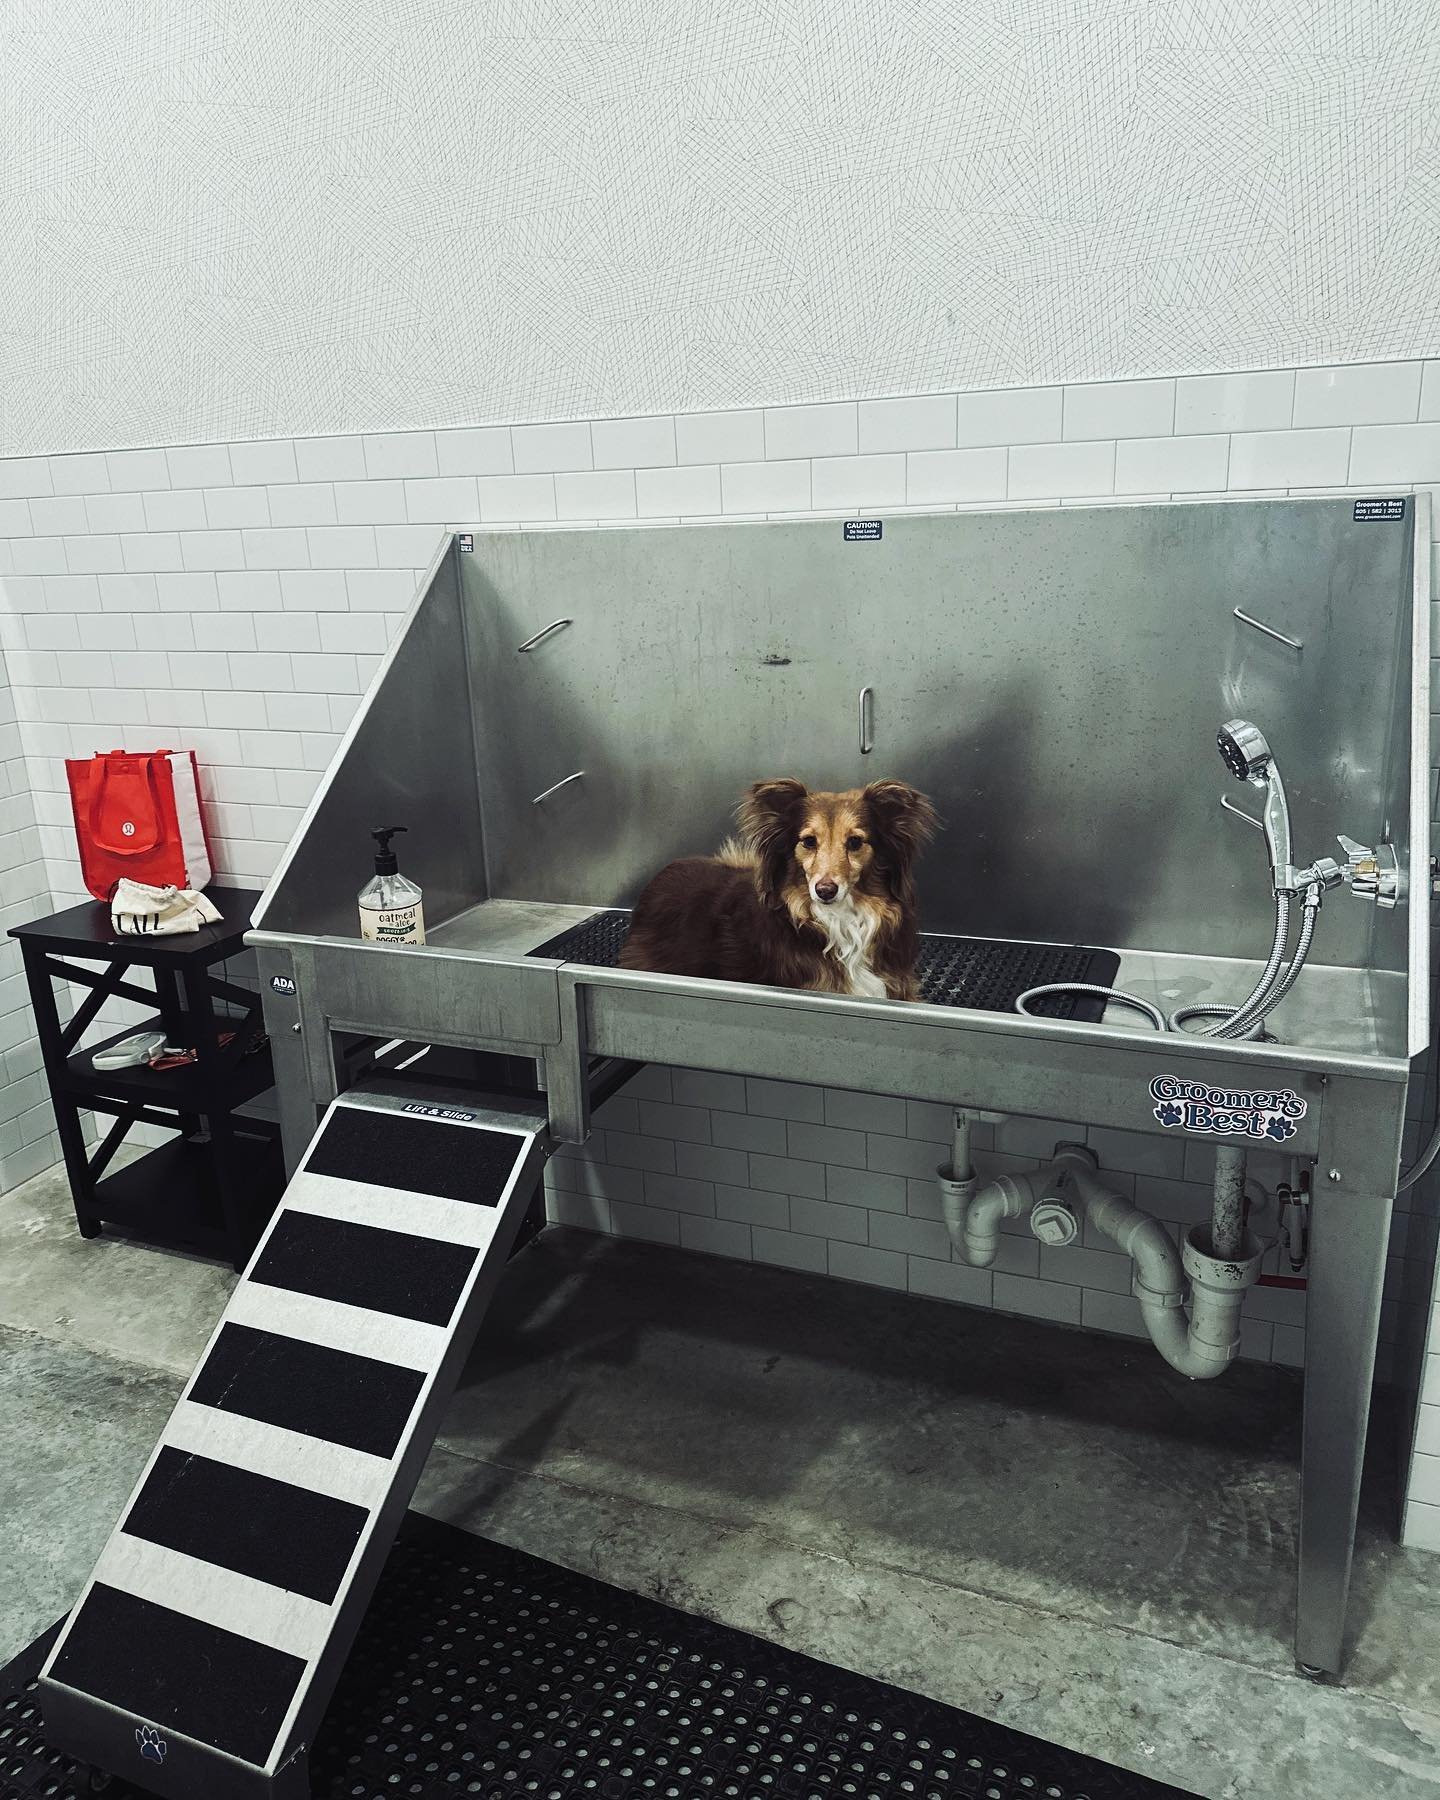 🐾 Introducing the Darby&rsquo;s Pet Spa. Featuring todays model, Delilah! 🛁 Treat your furry friend to a spa day experience like no other! Say goodbye to messy baths at home and hello to convenience and relaxation. Snap a pic of your squeaky-clean 